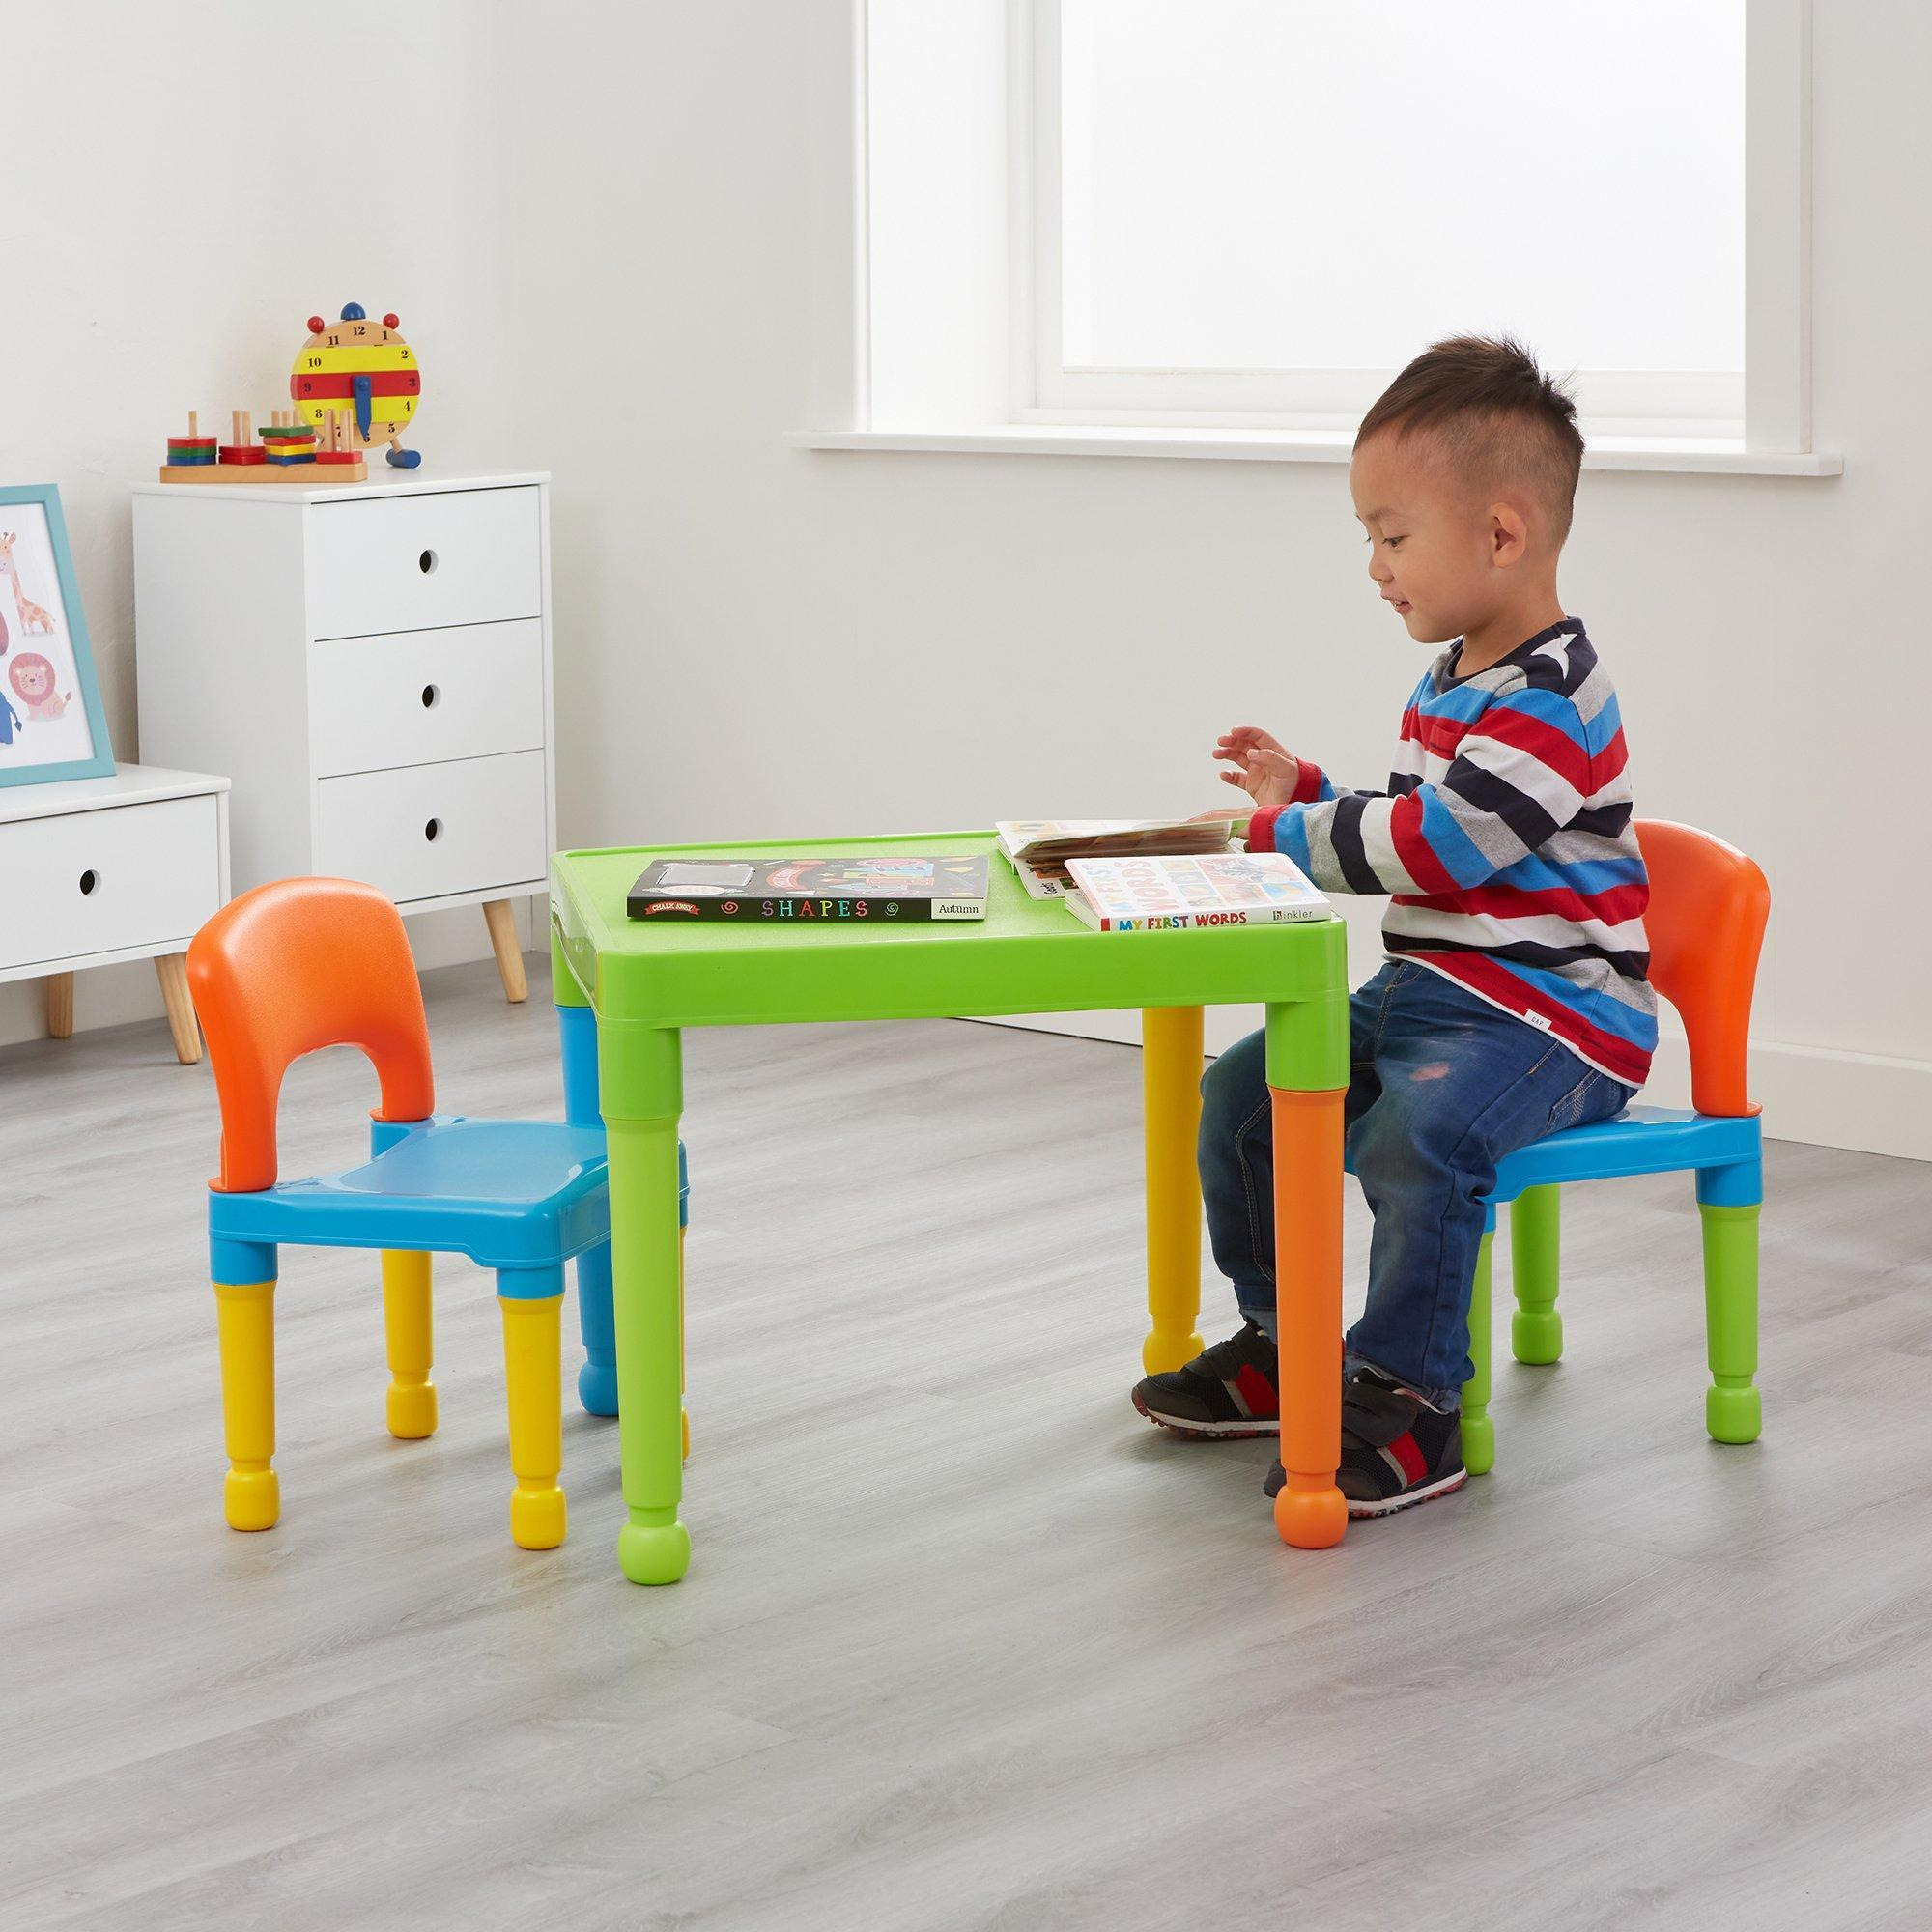 Children's Multicoloured Plastic Table and 2 Chair Set - image 1